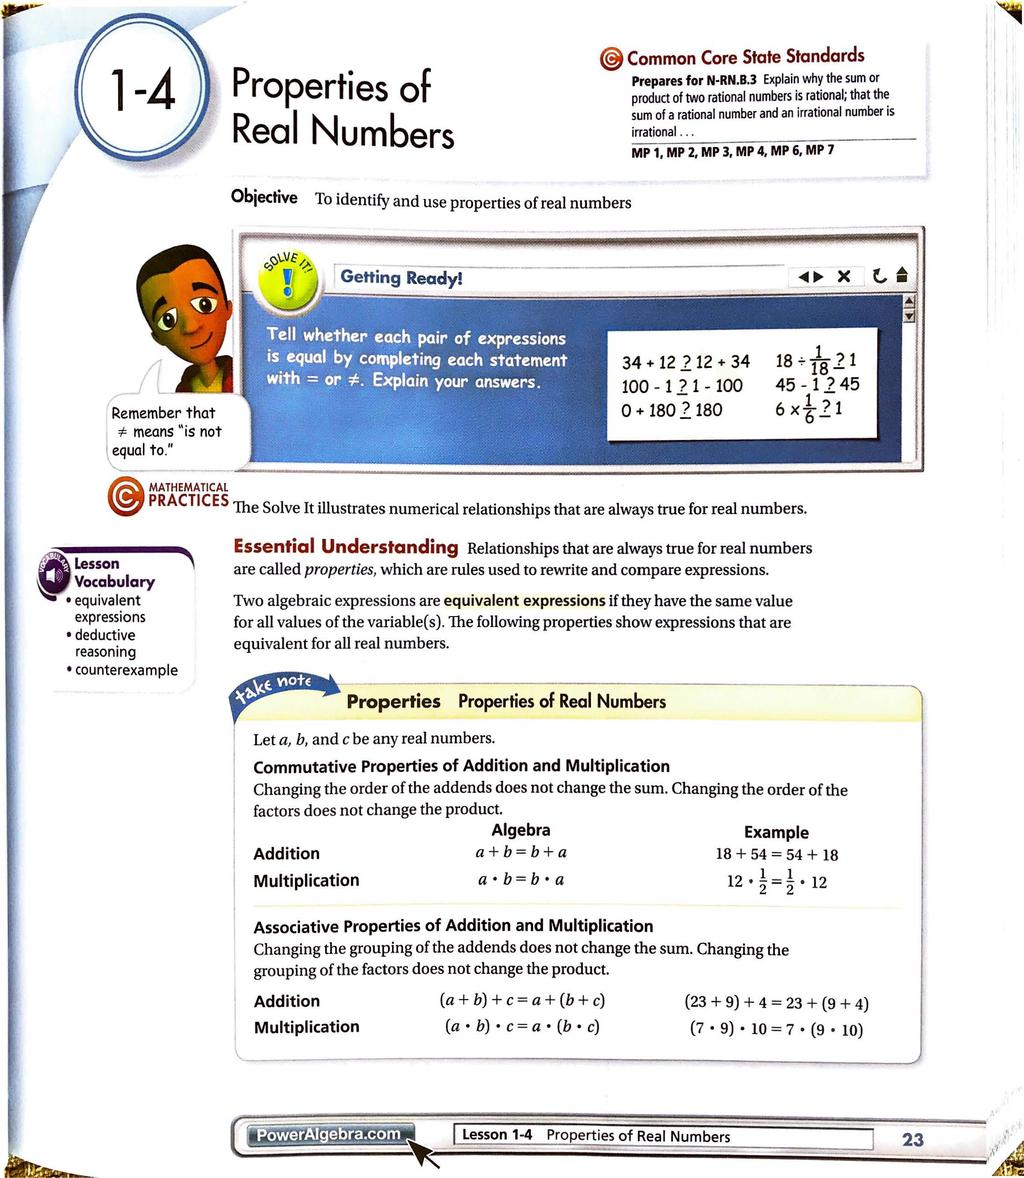 Properties of Real Numbers @) Common Core State Standards Prepares for N-RN.8.